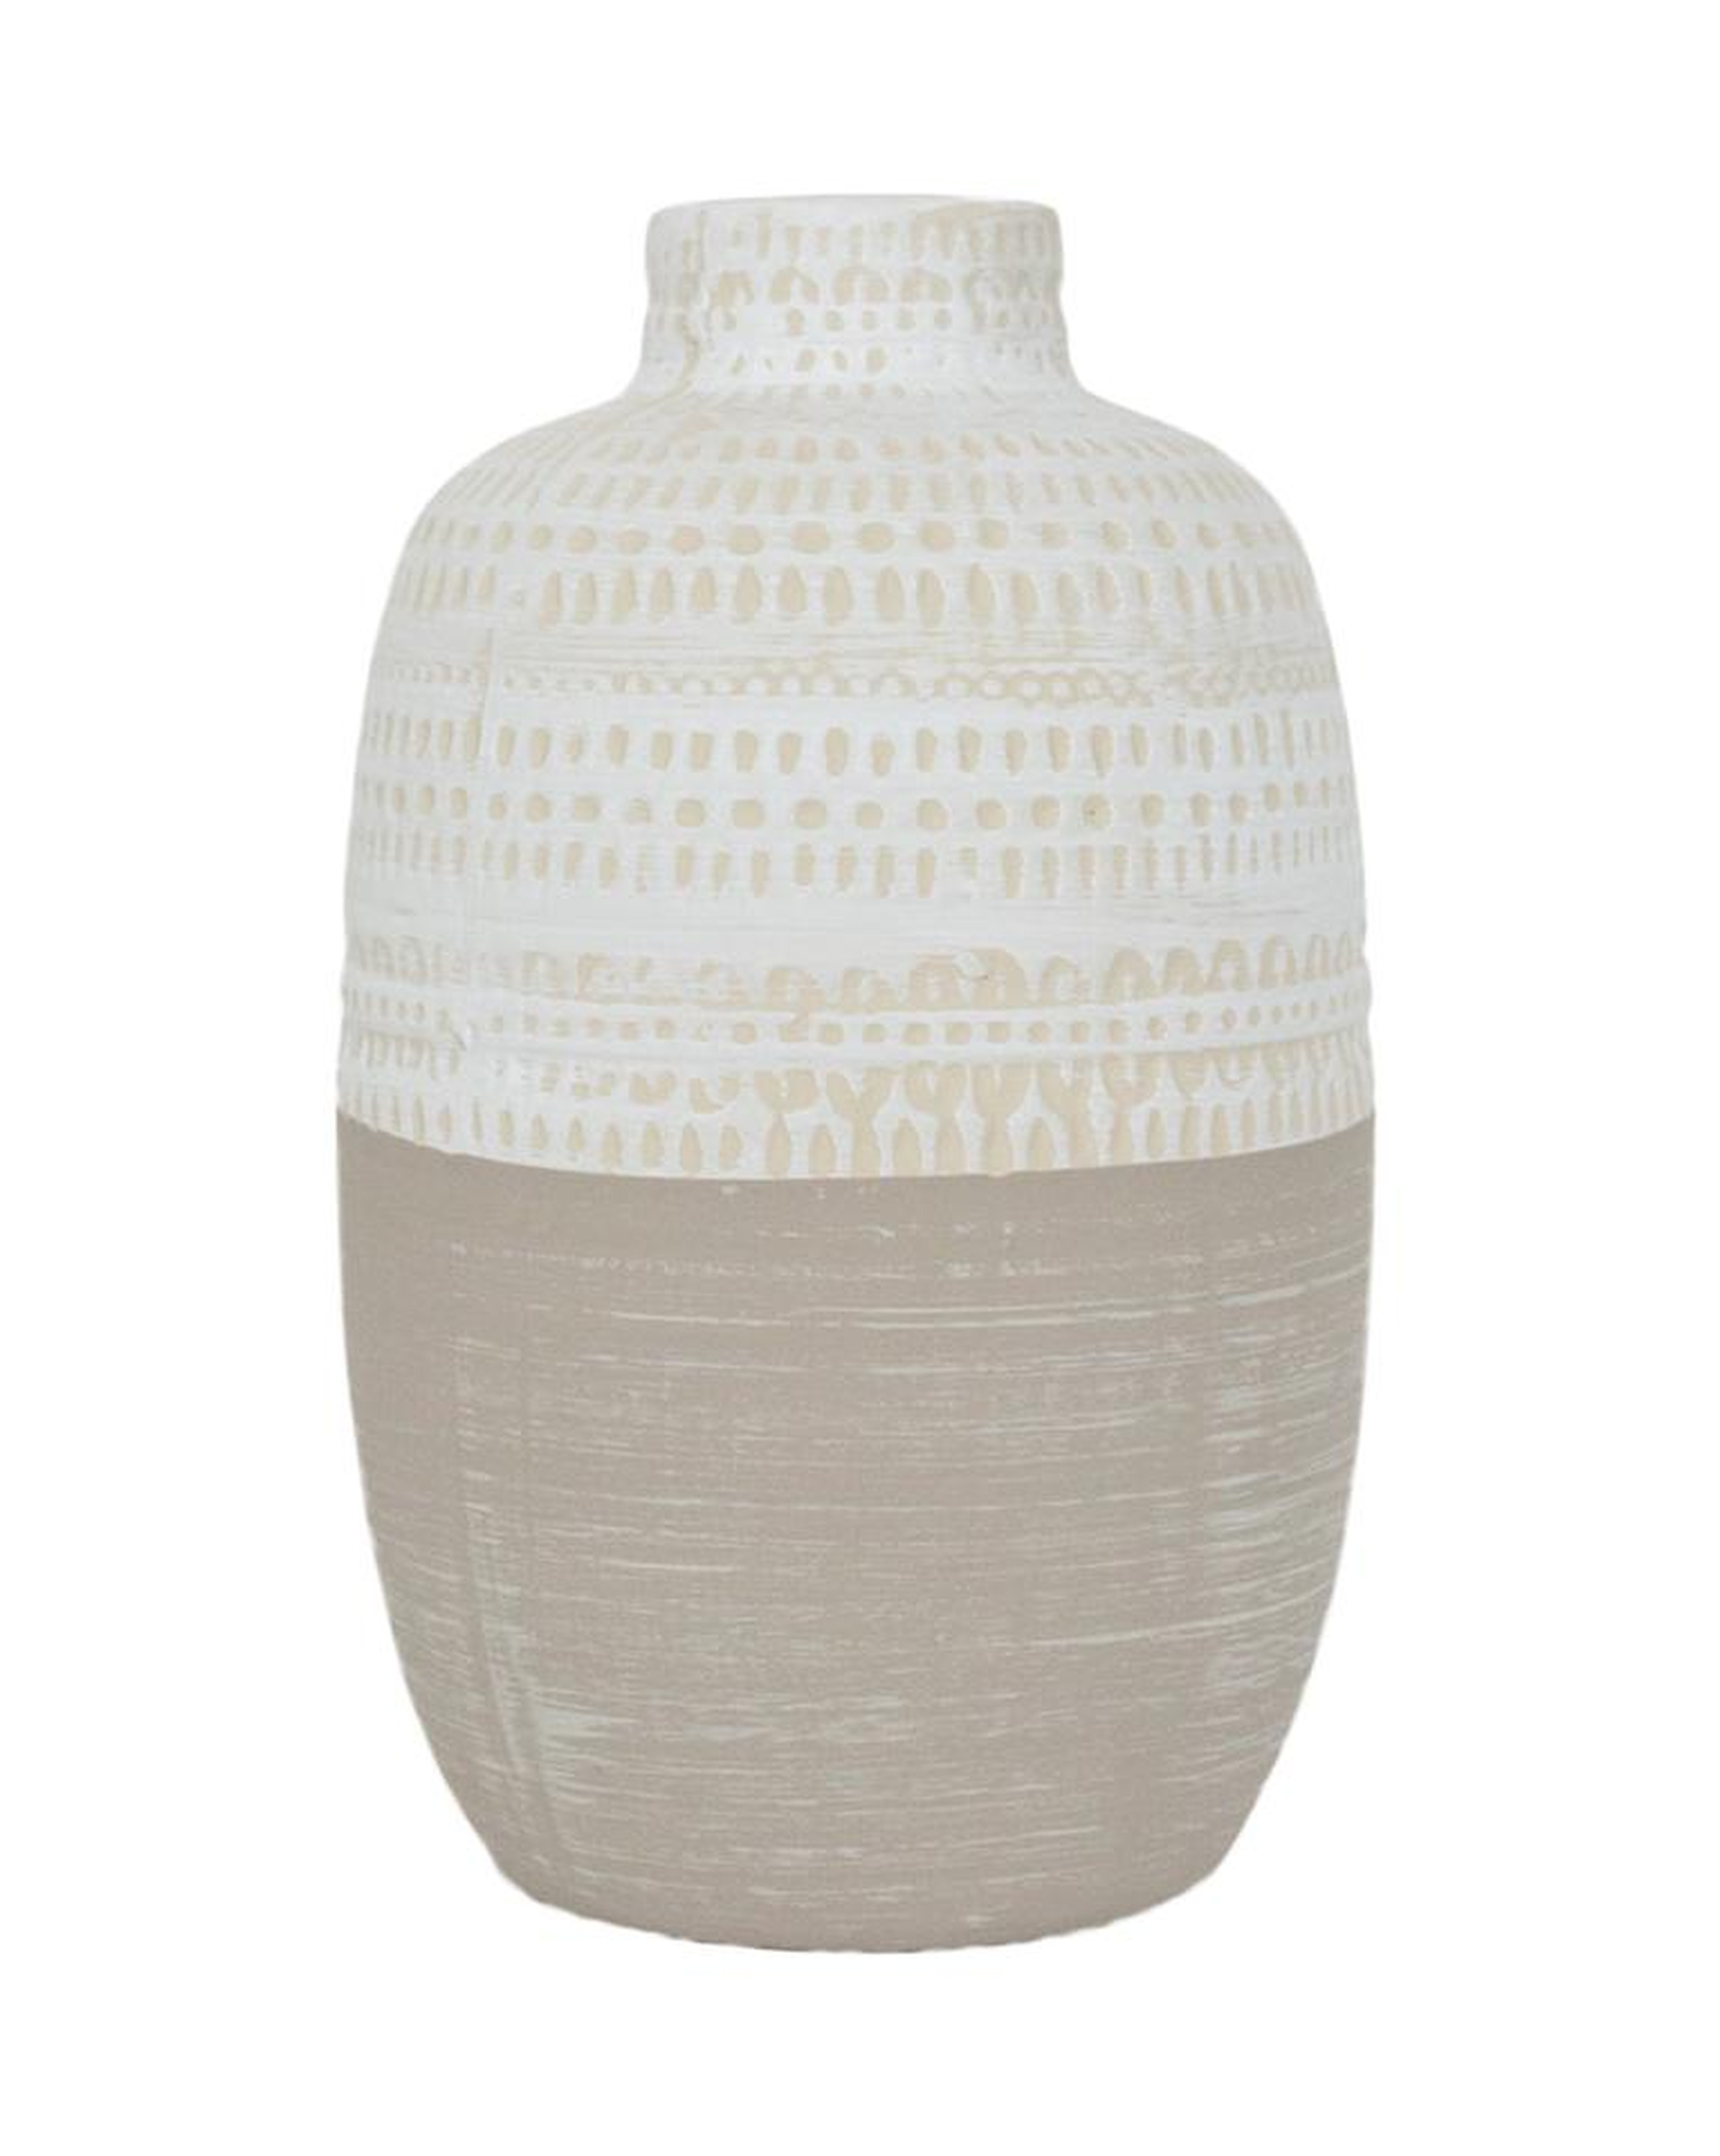 STAMPED TRIBAL VASE, LARGE - McGee & Co.